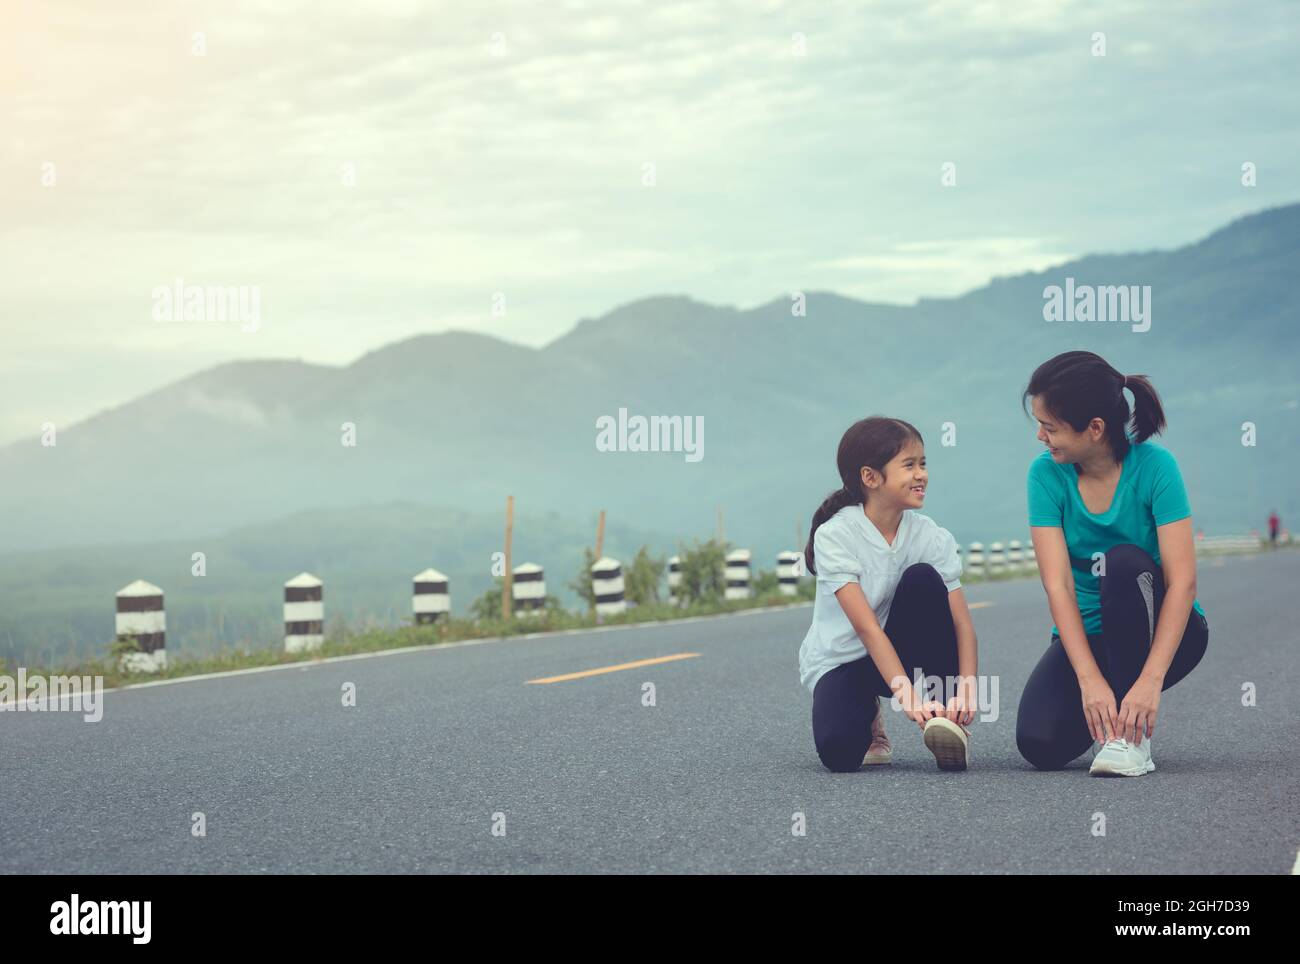 Mom and child are kneeling and tying shoelace. We getting ready for jogging outdoors the time during sunrise on dam road exercise. Stock Photo